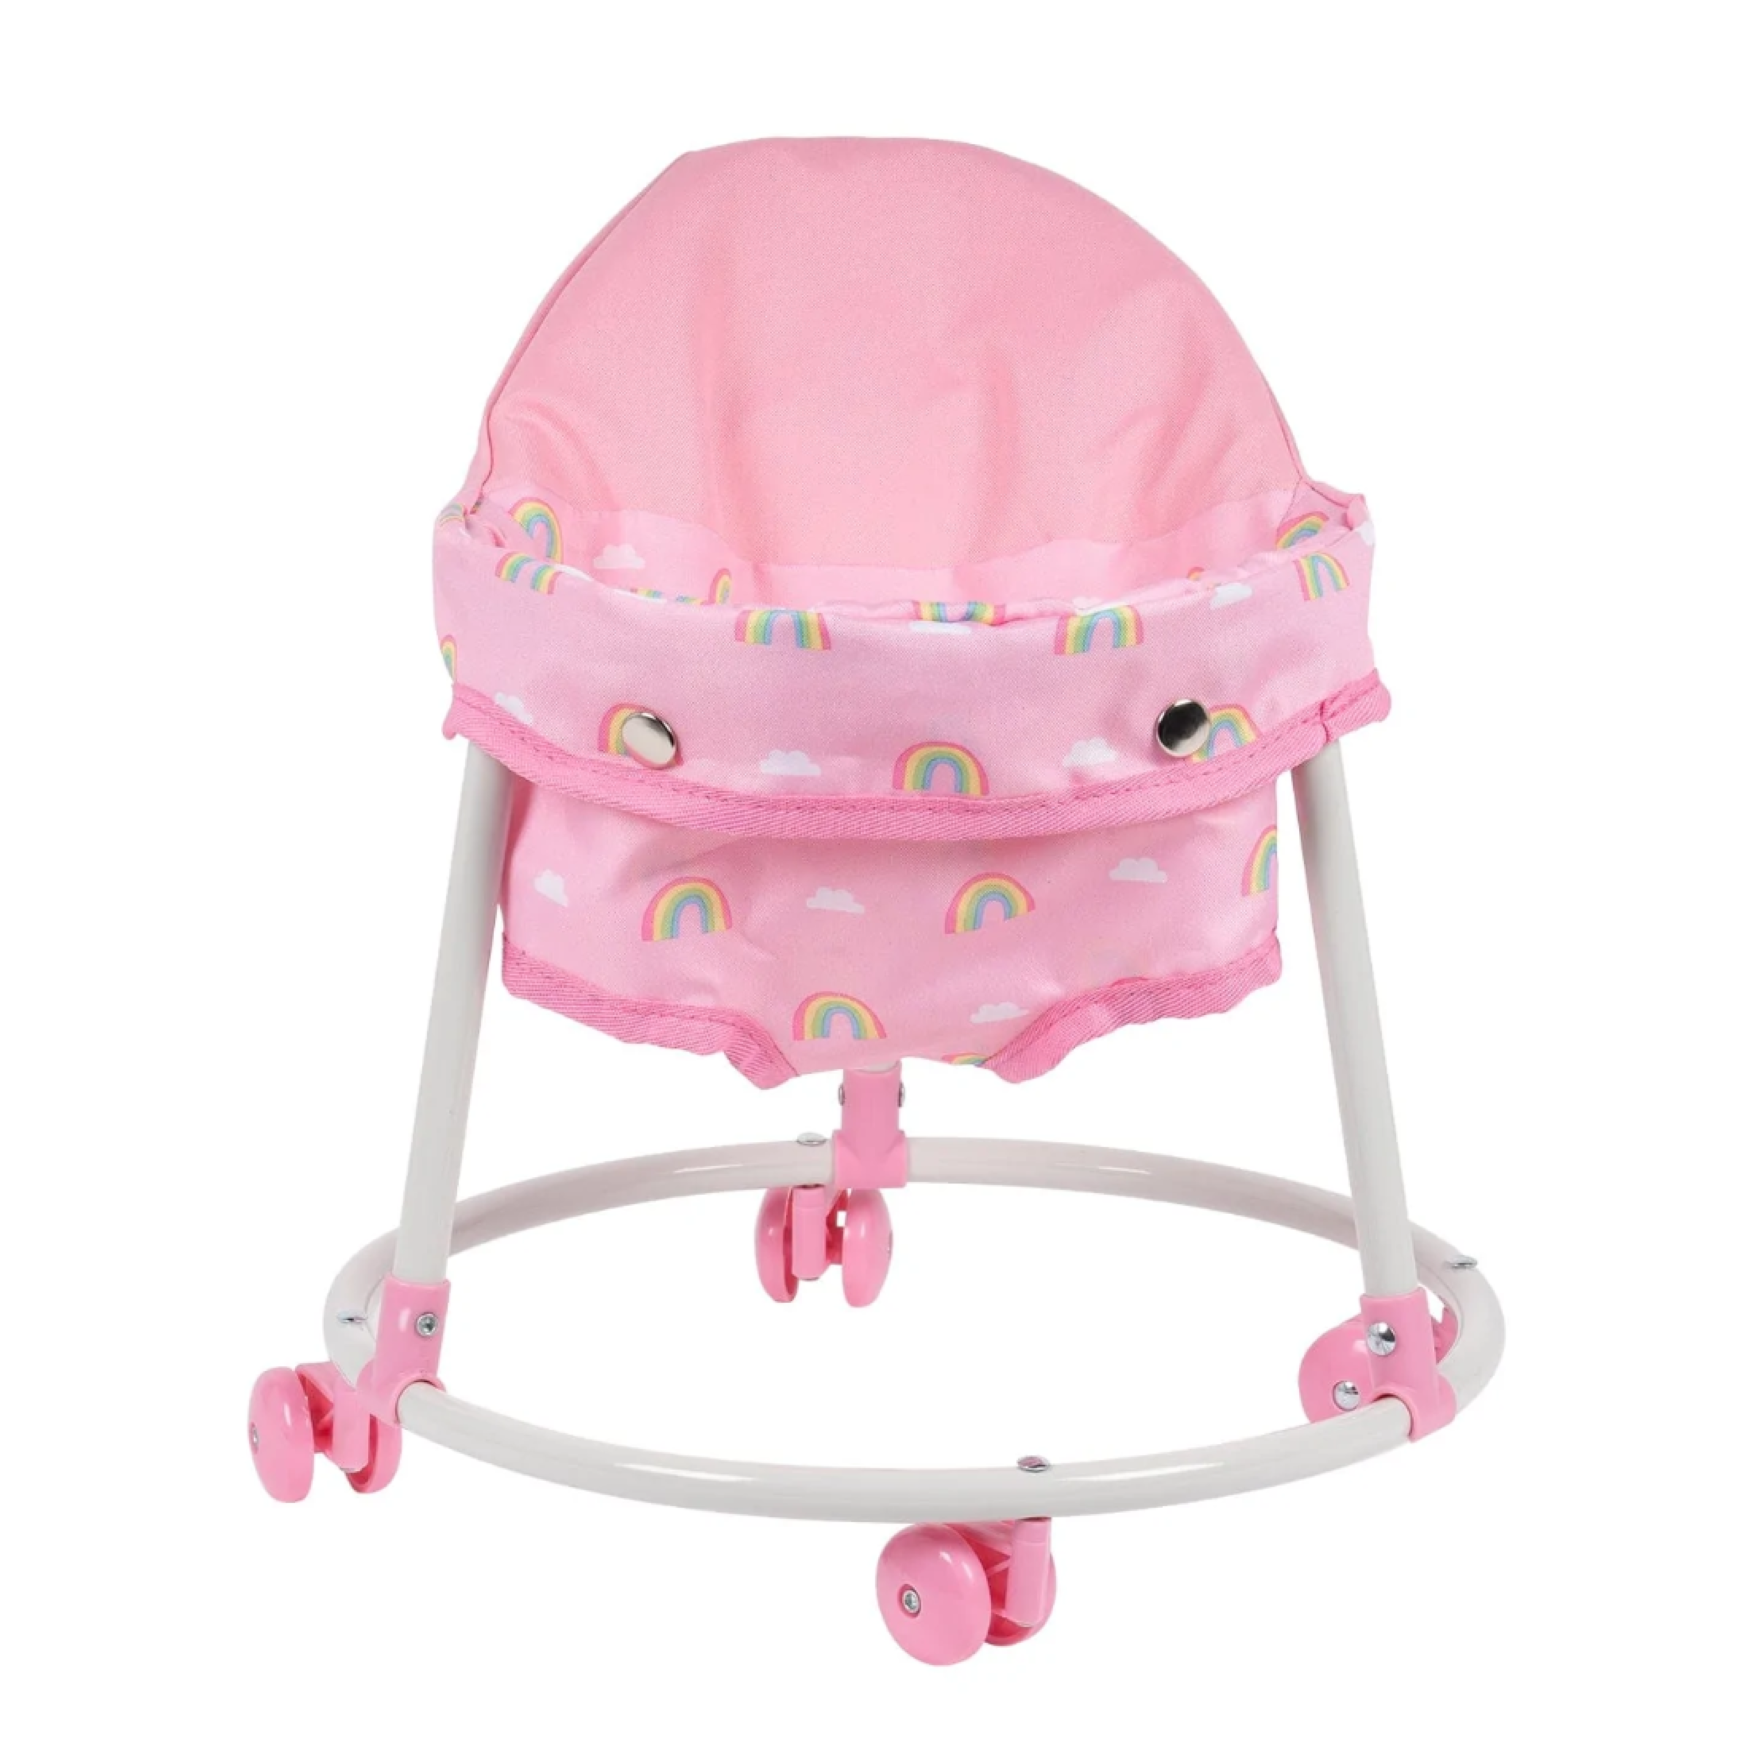 Adora Rainbow Rose Walker fits up to 20"